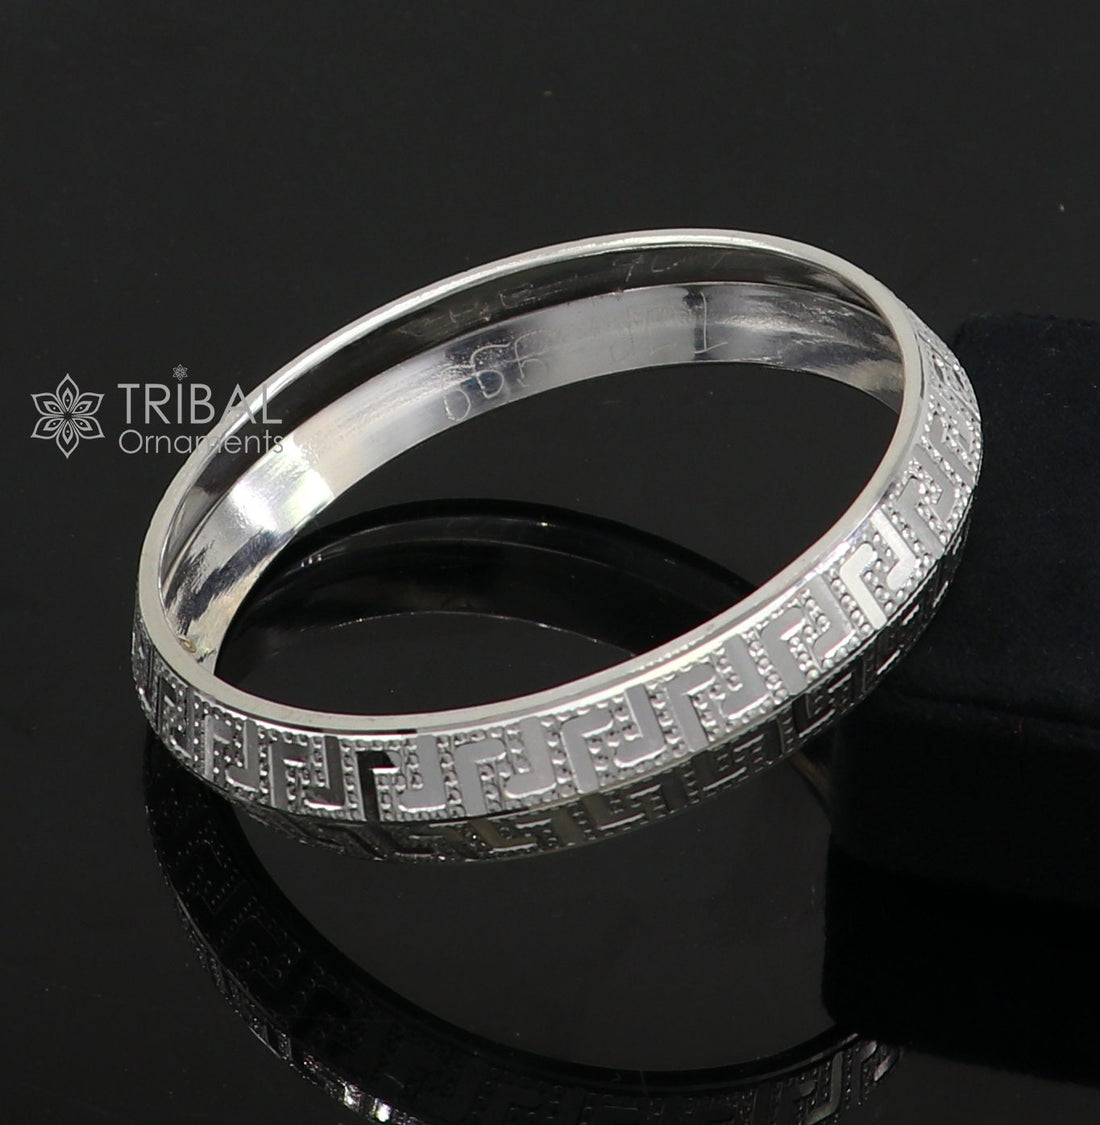 999 Pure Solid silver handmade vintage style bangle bracelet kada tribal jewelry best for men's gifting silver articles nsk802 - TRIBAL ORNAMENTS